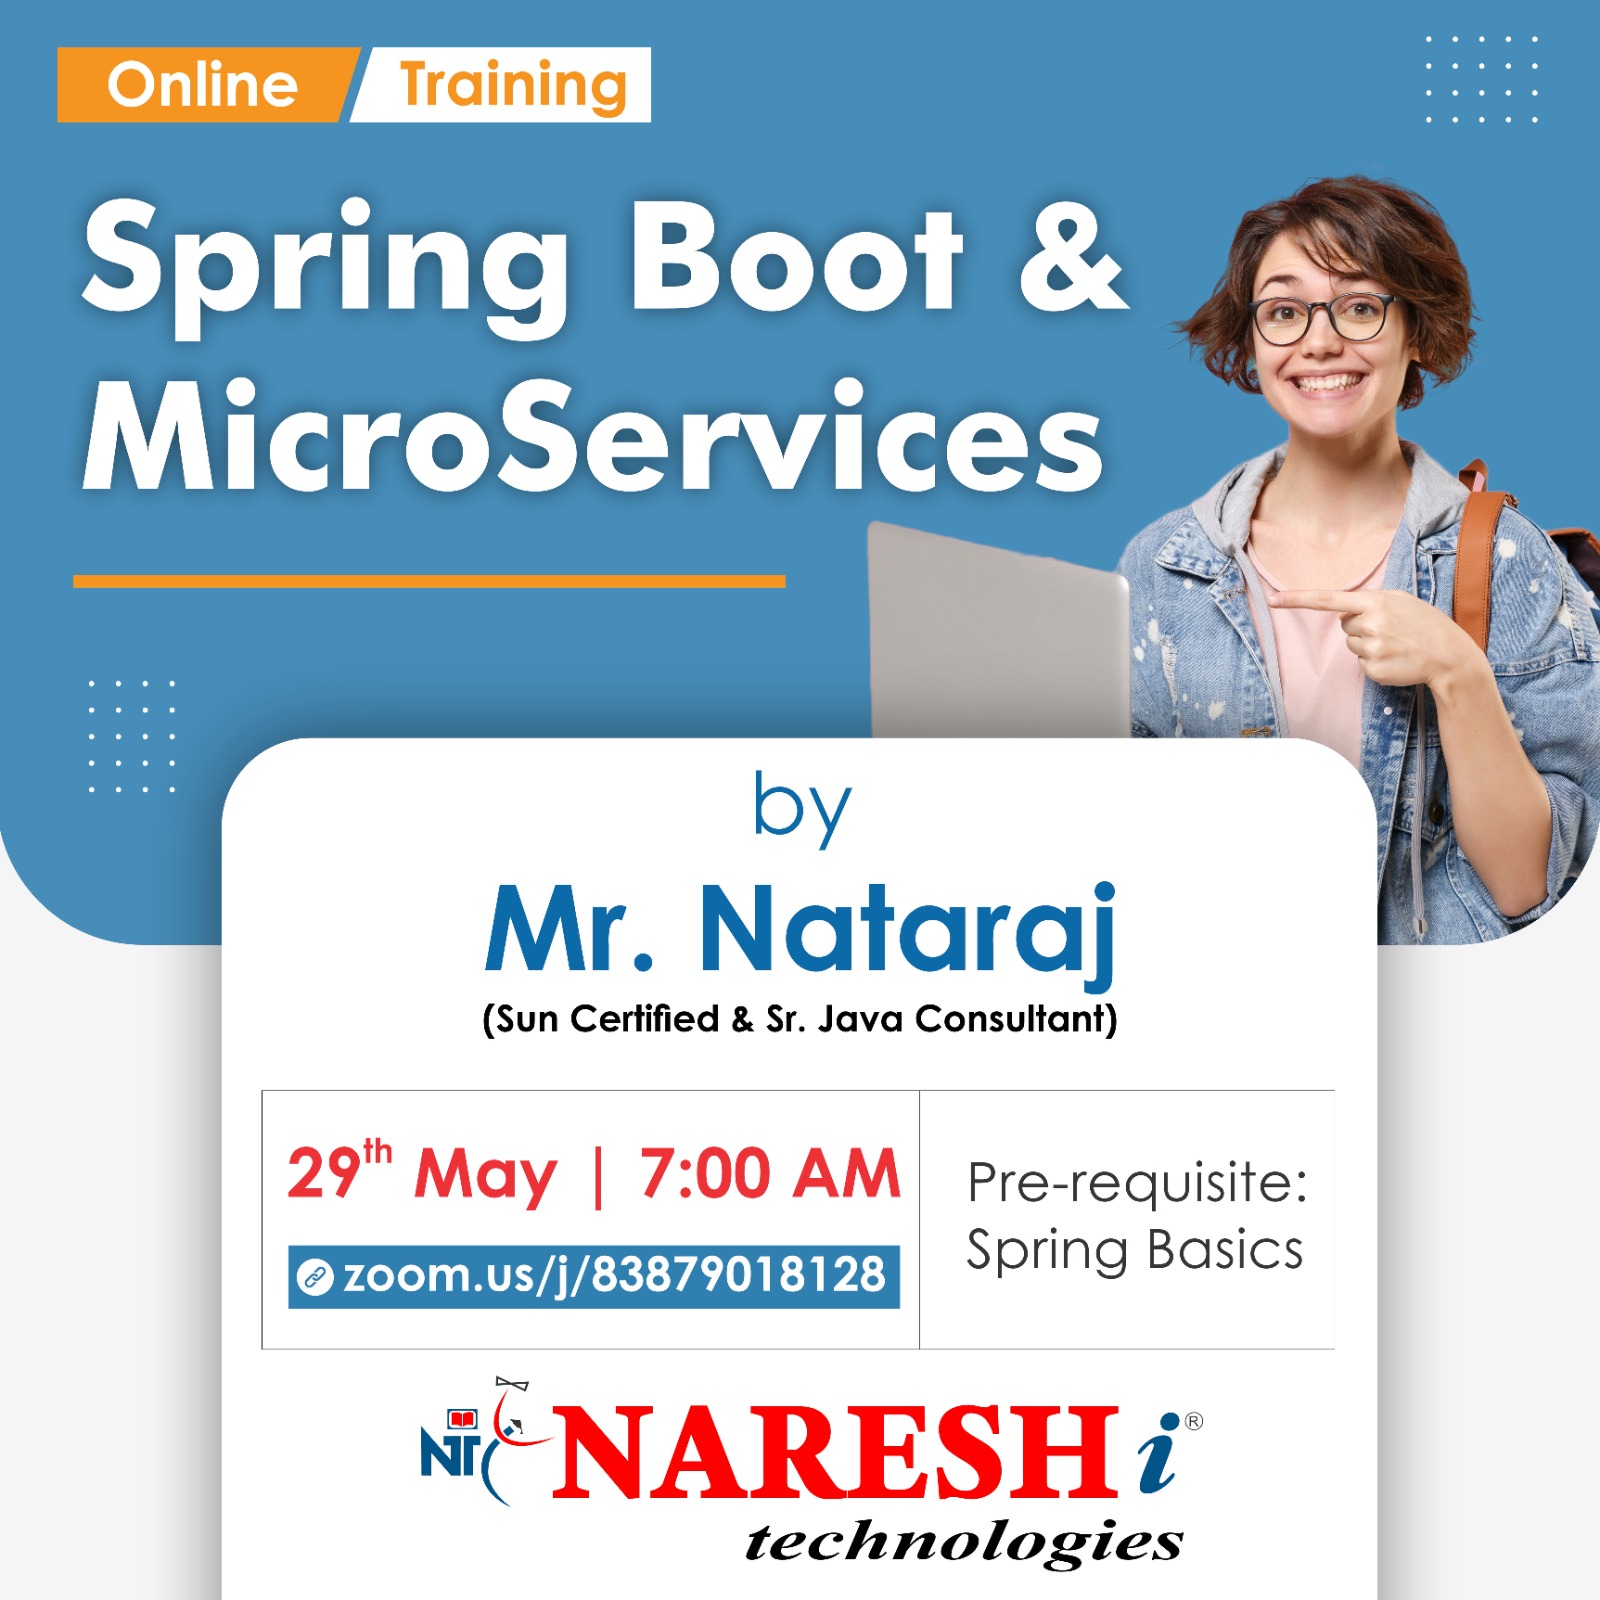 Free Demo On Spring Boot & Micro Services Course in NareshIT - 91-8179191999, Online Event